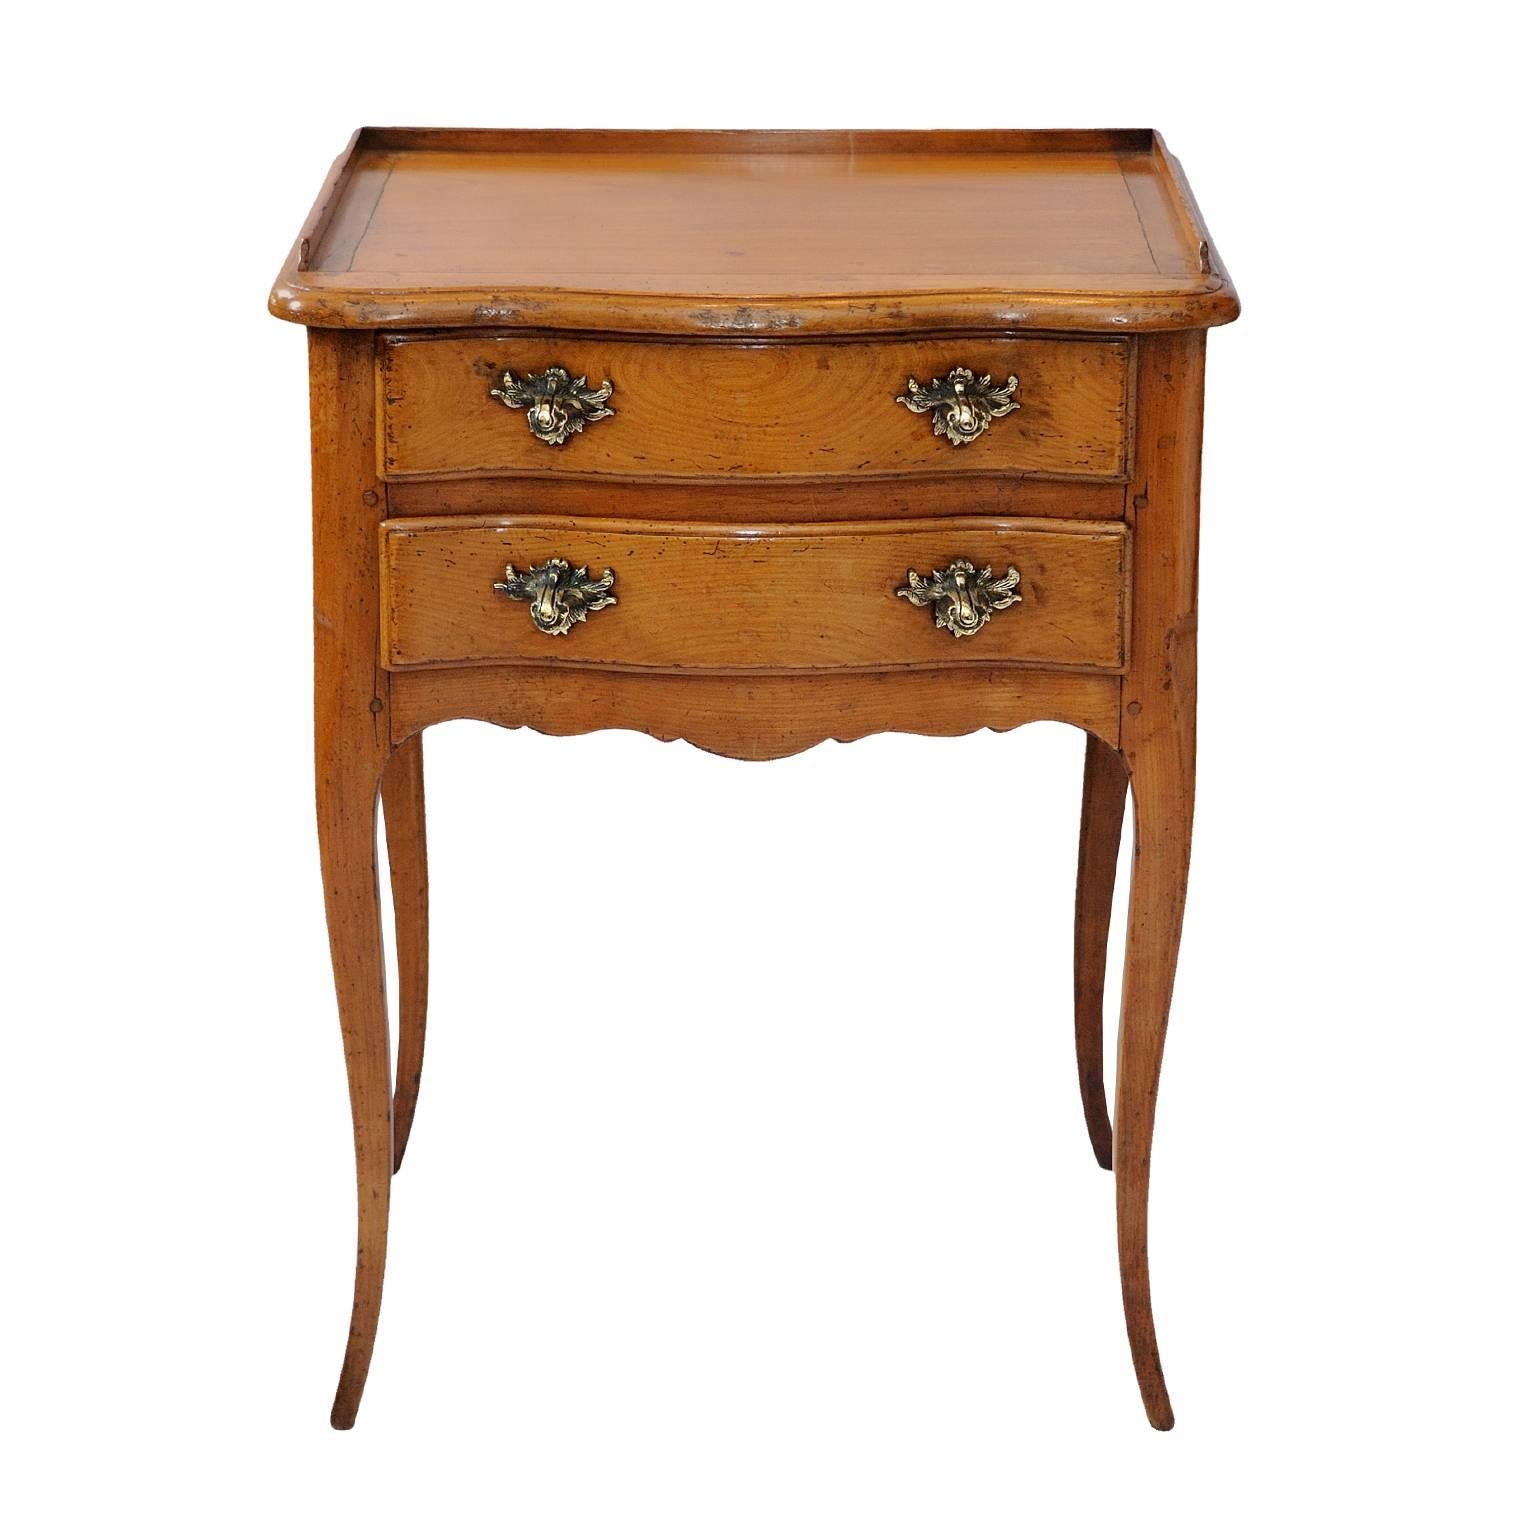 This is a rather smart freestanding French late 19th century Louis XV style cherrywood Side Table, complete with two drawers and cabriol legs, circa 1880.